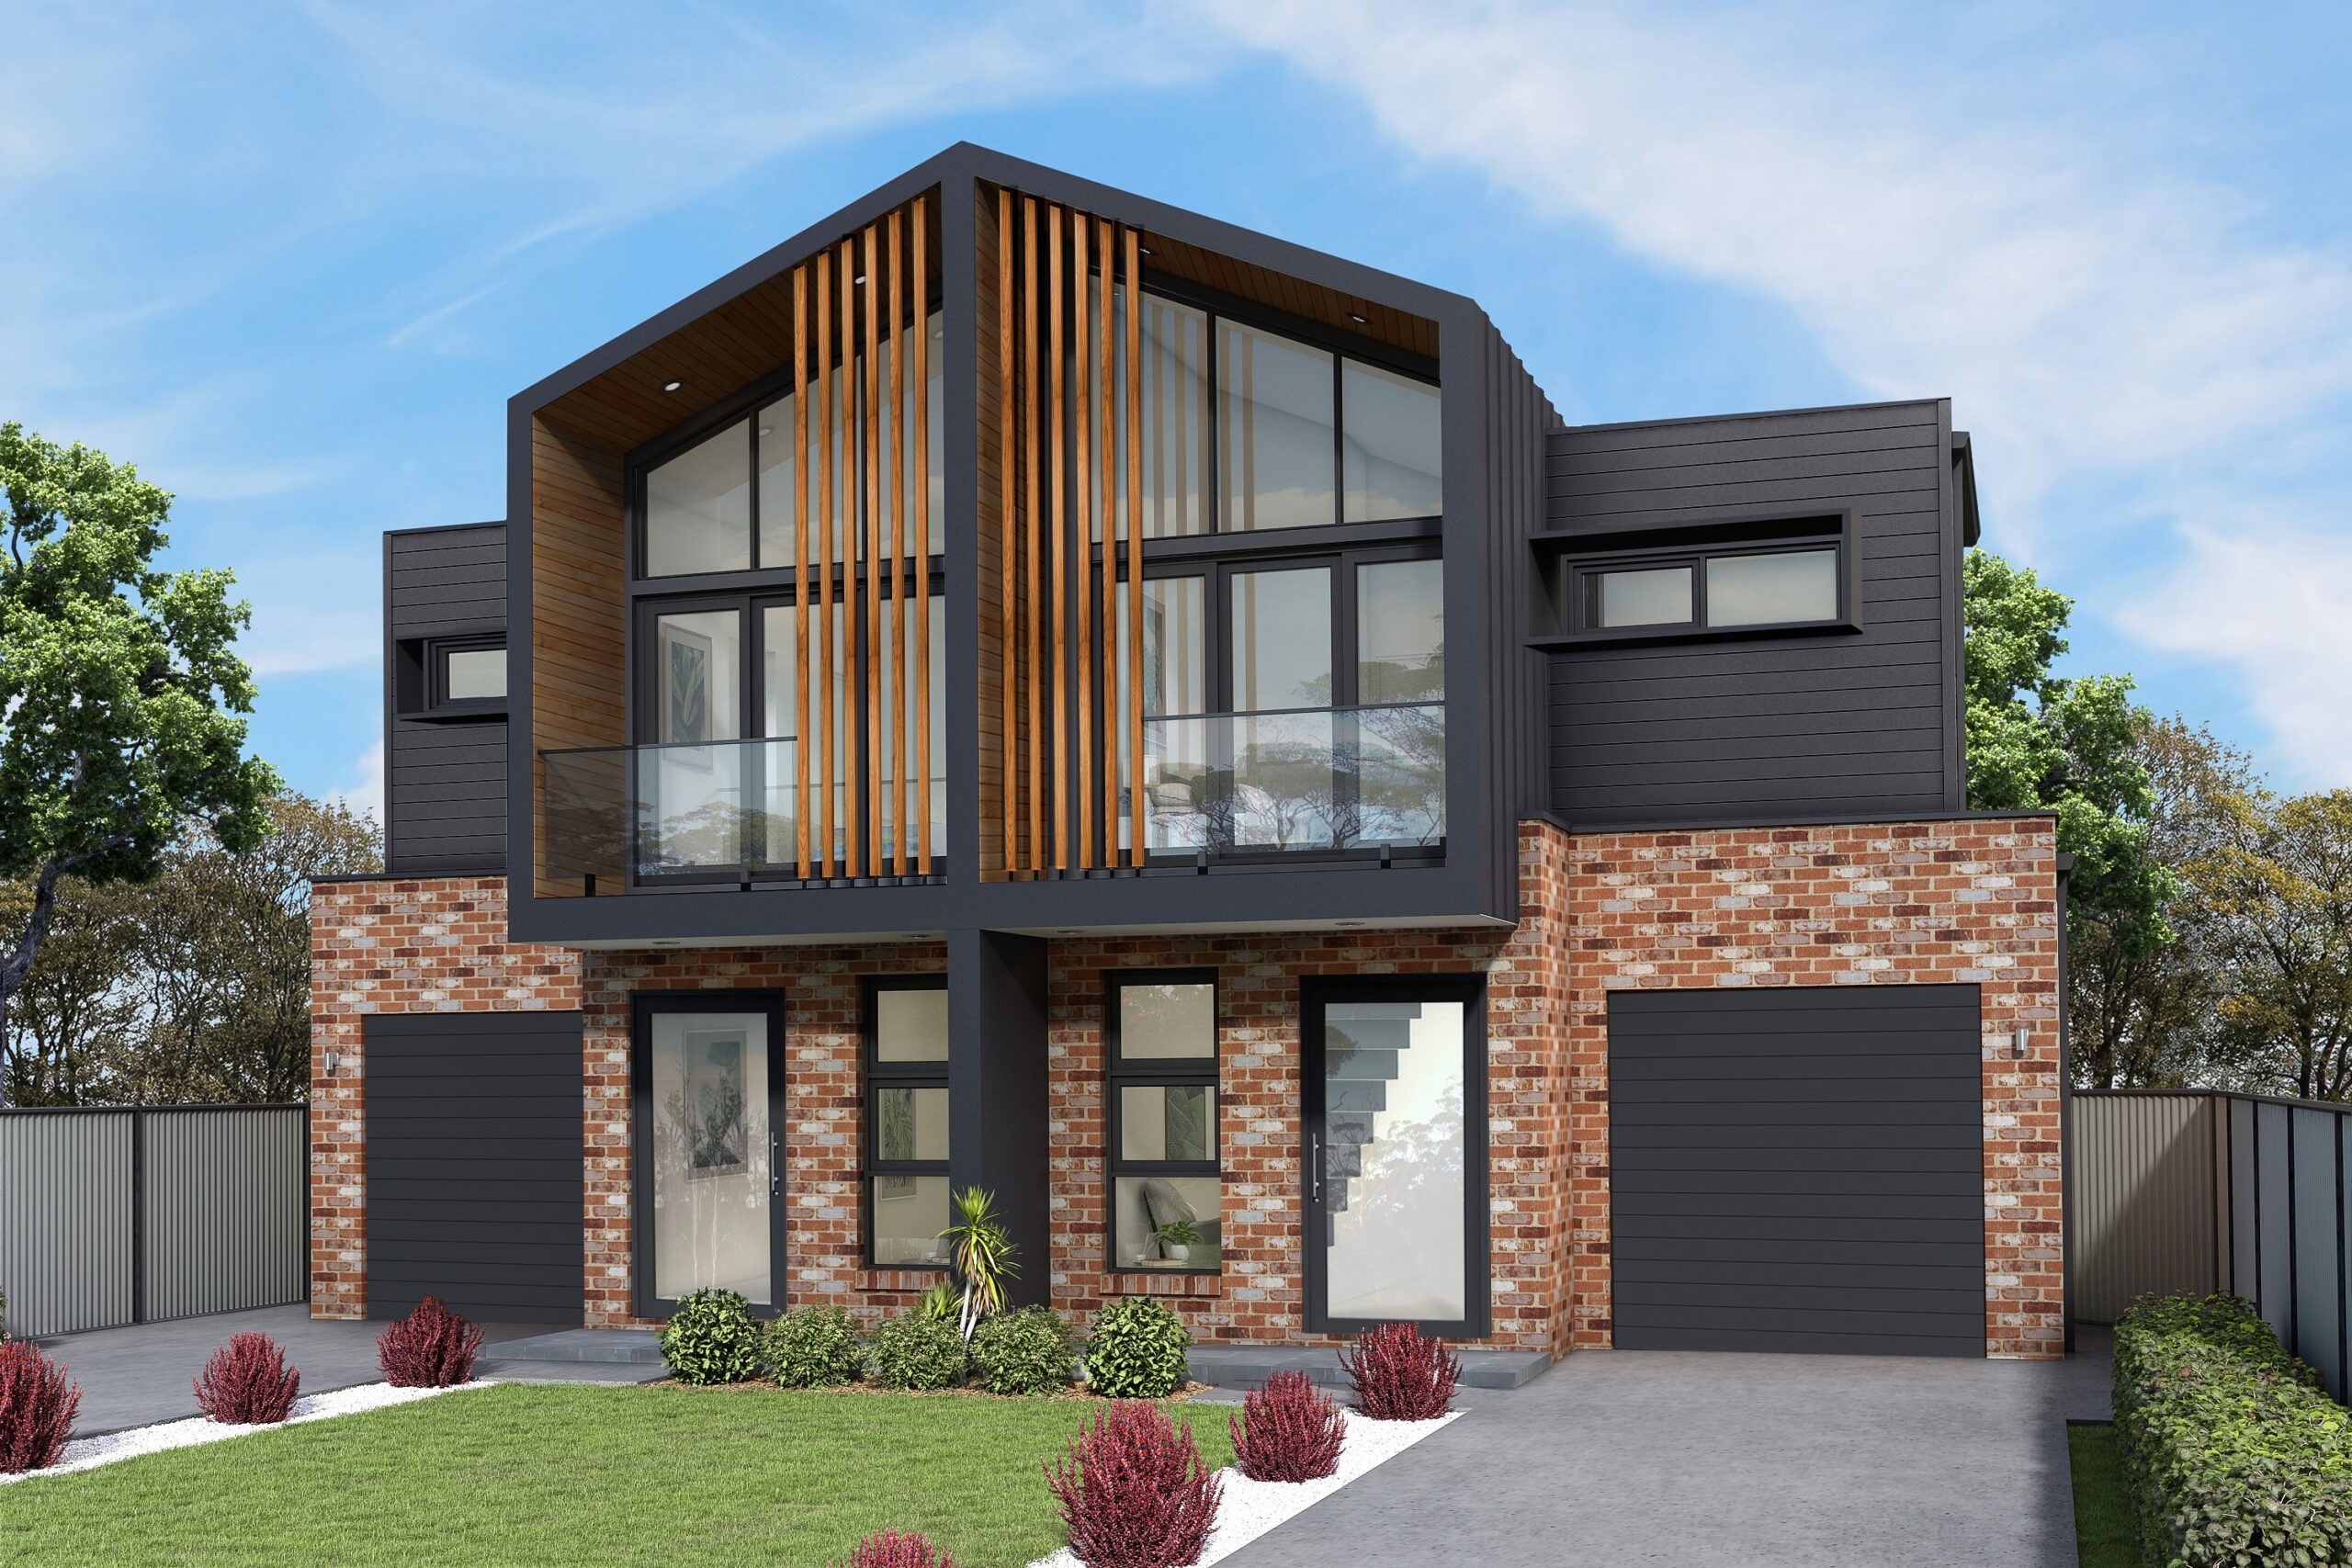 Render of a modern, two storey duplex located in Georges Hall